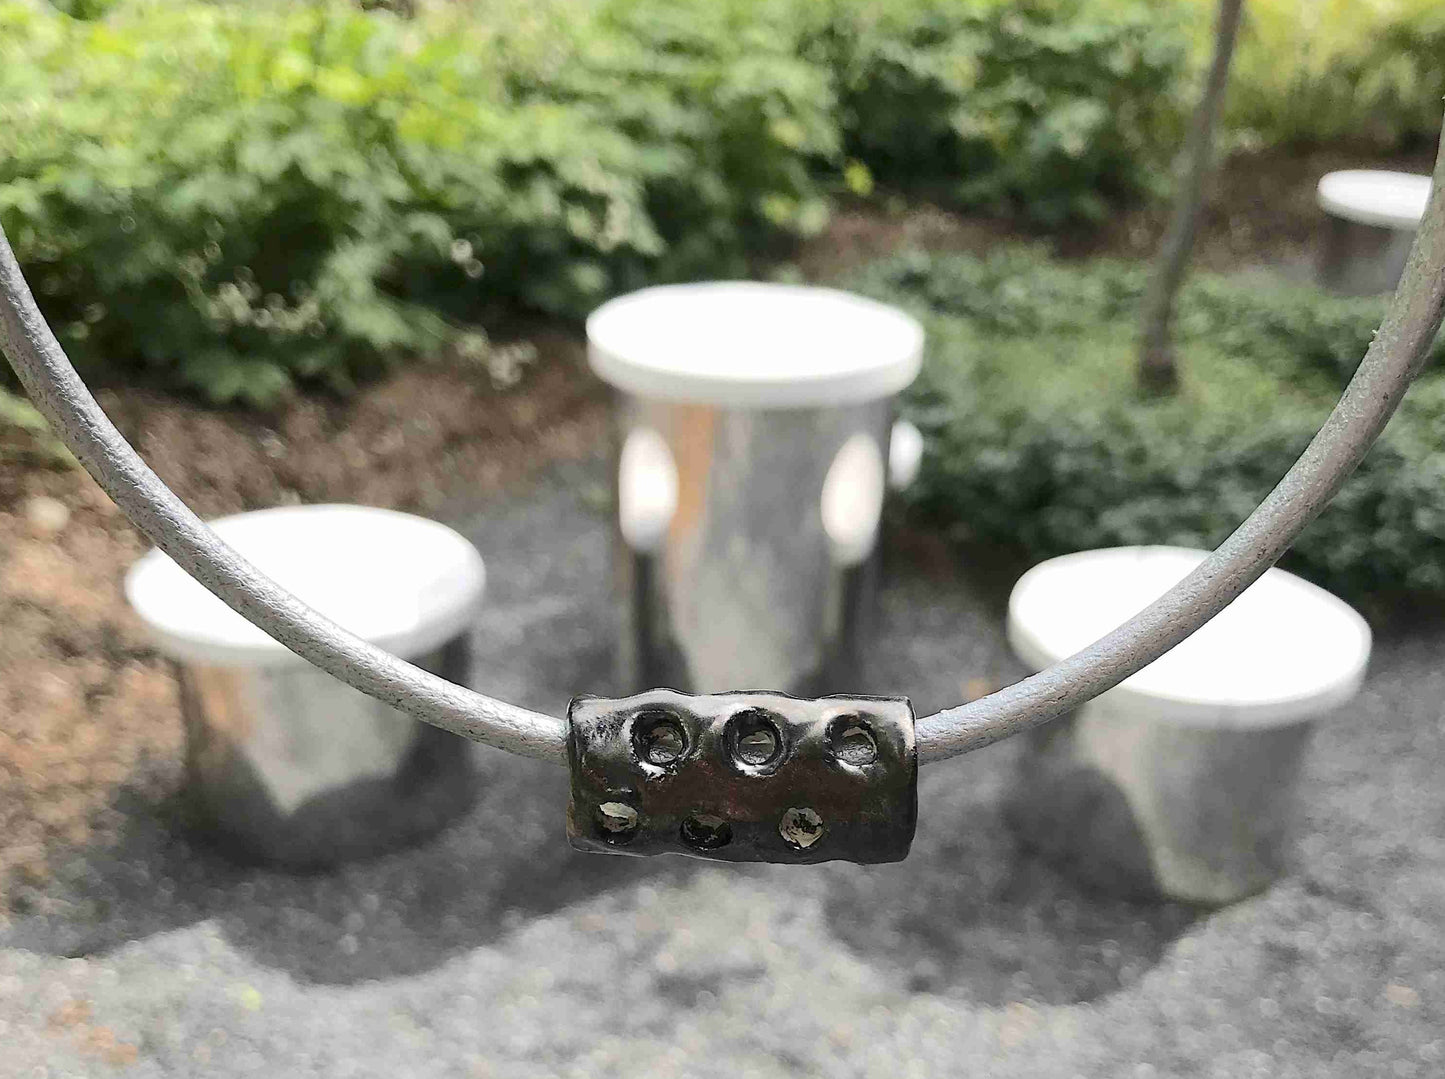 Choker necklace with black nickel ceramic cylinder handmade in Montreal, hole pattern, metallic silver leather cord, stainless steel clasp